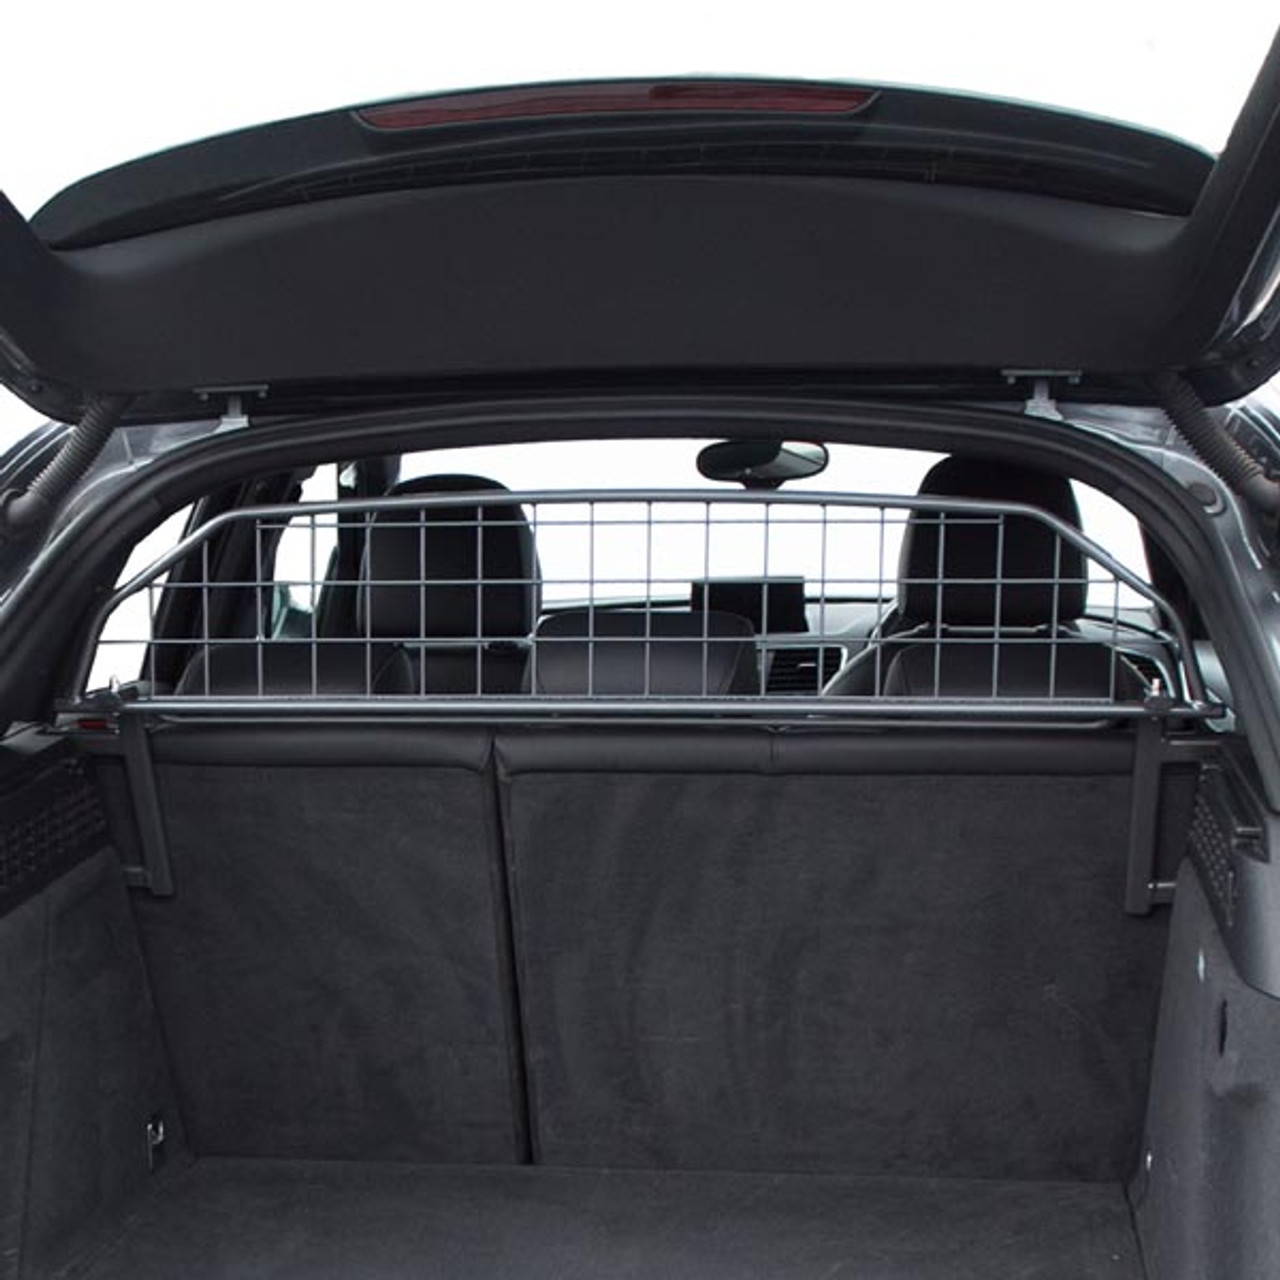 Custom Made Dog Guard for Audi Q3 2011 to 2018